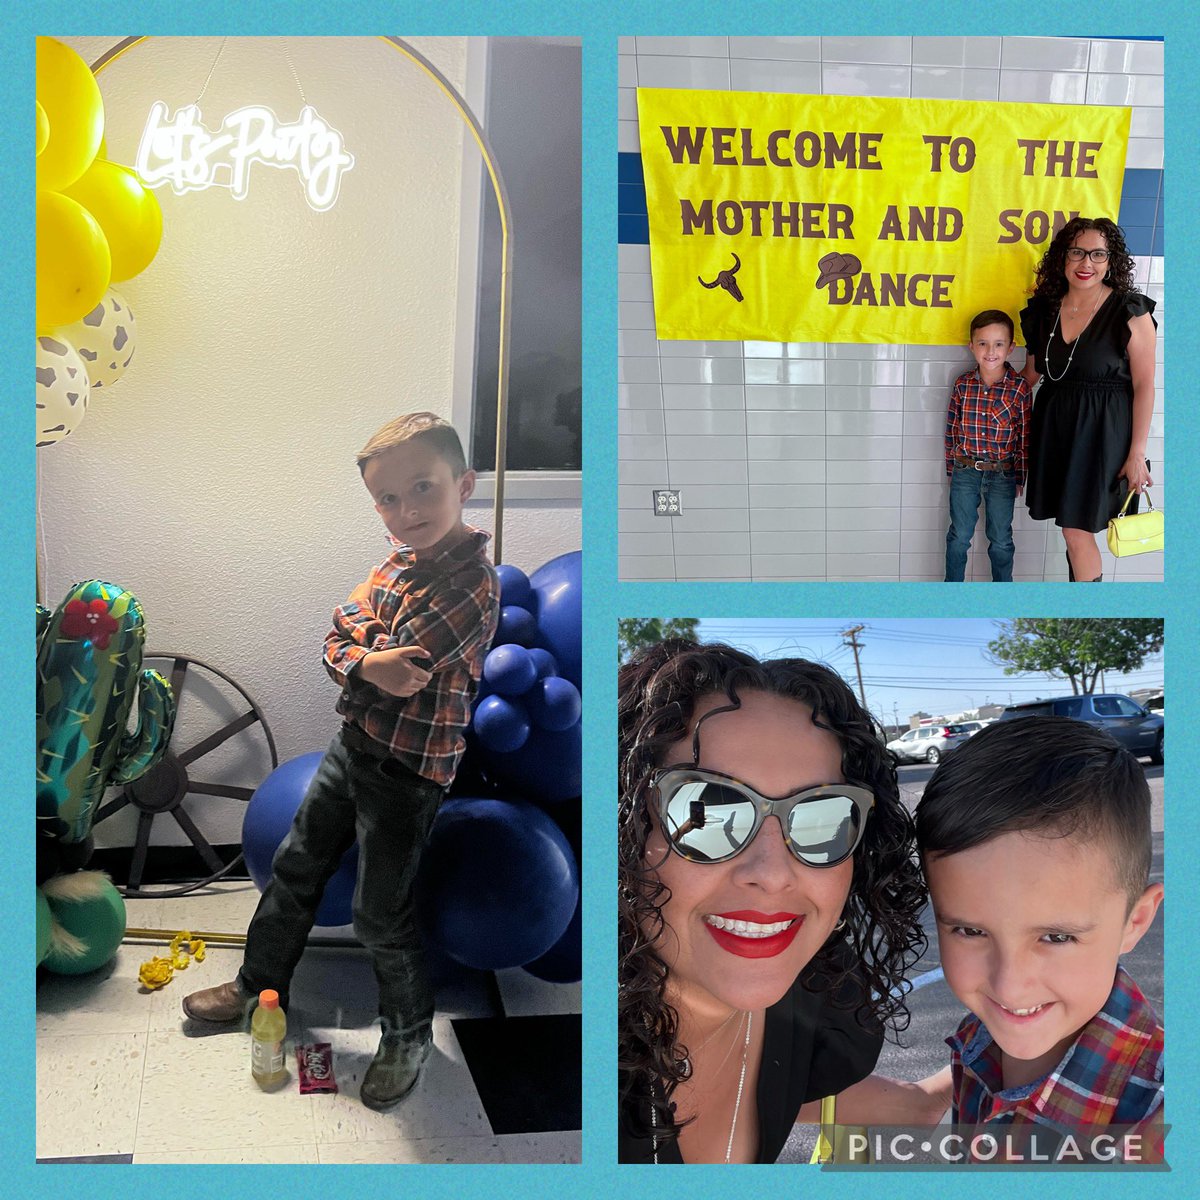 My lil’ cowboy & I had a boot scootin' time at the Mother & Son Dance!! Thank you @LChavez_ES for putting on this amazing event!! 💛🤠💙 #BetterTogether